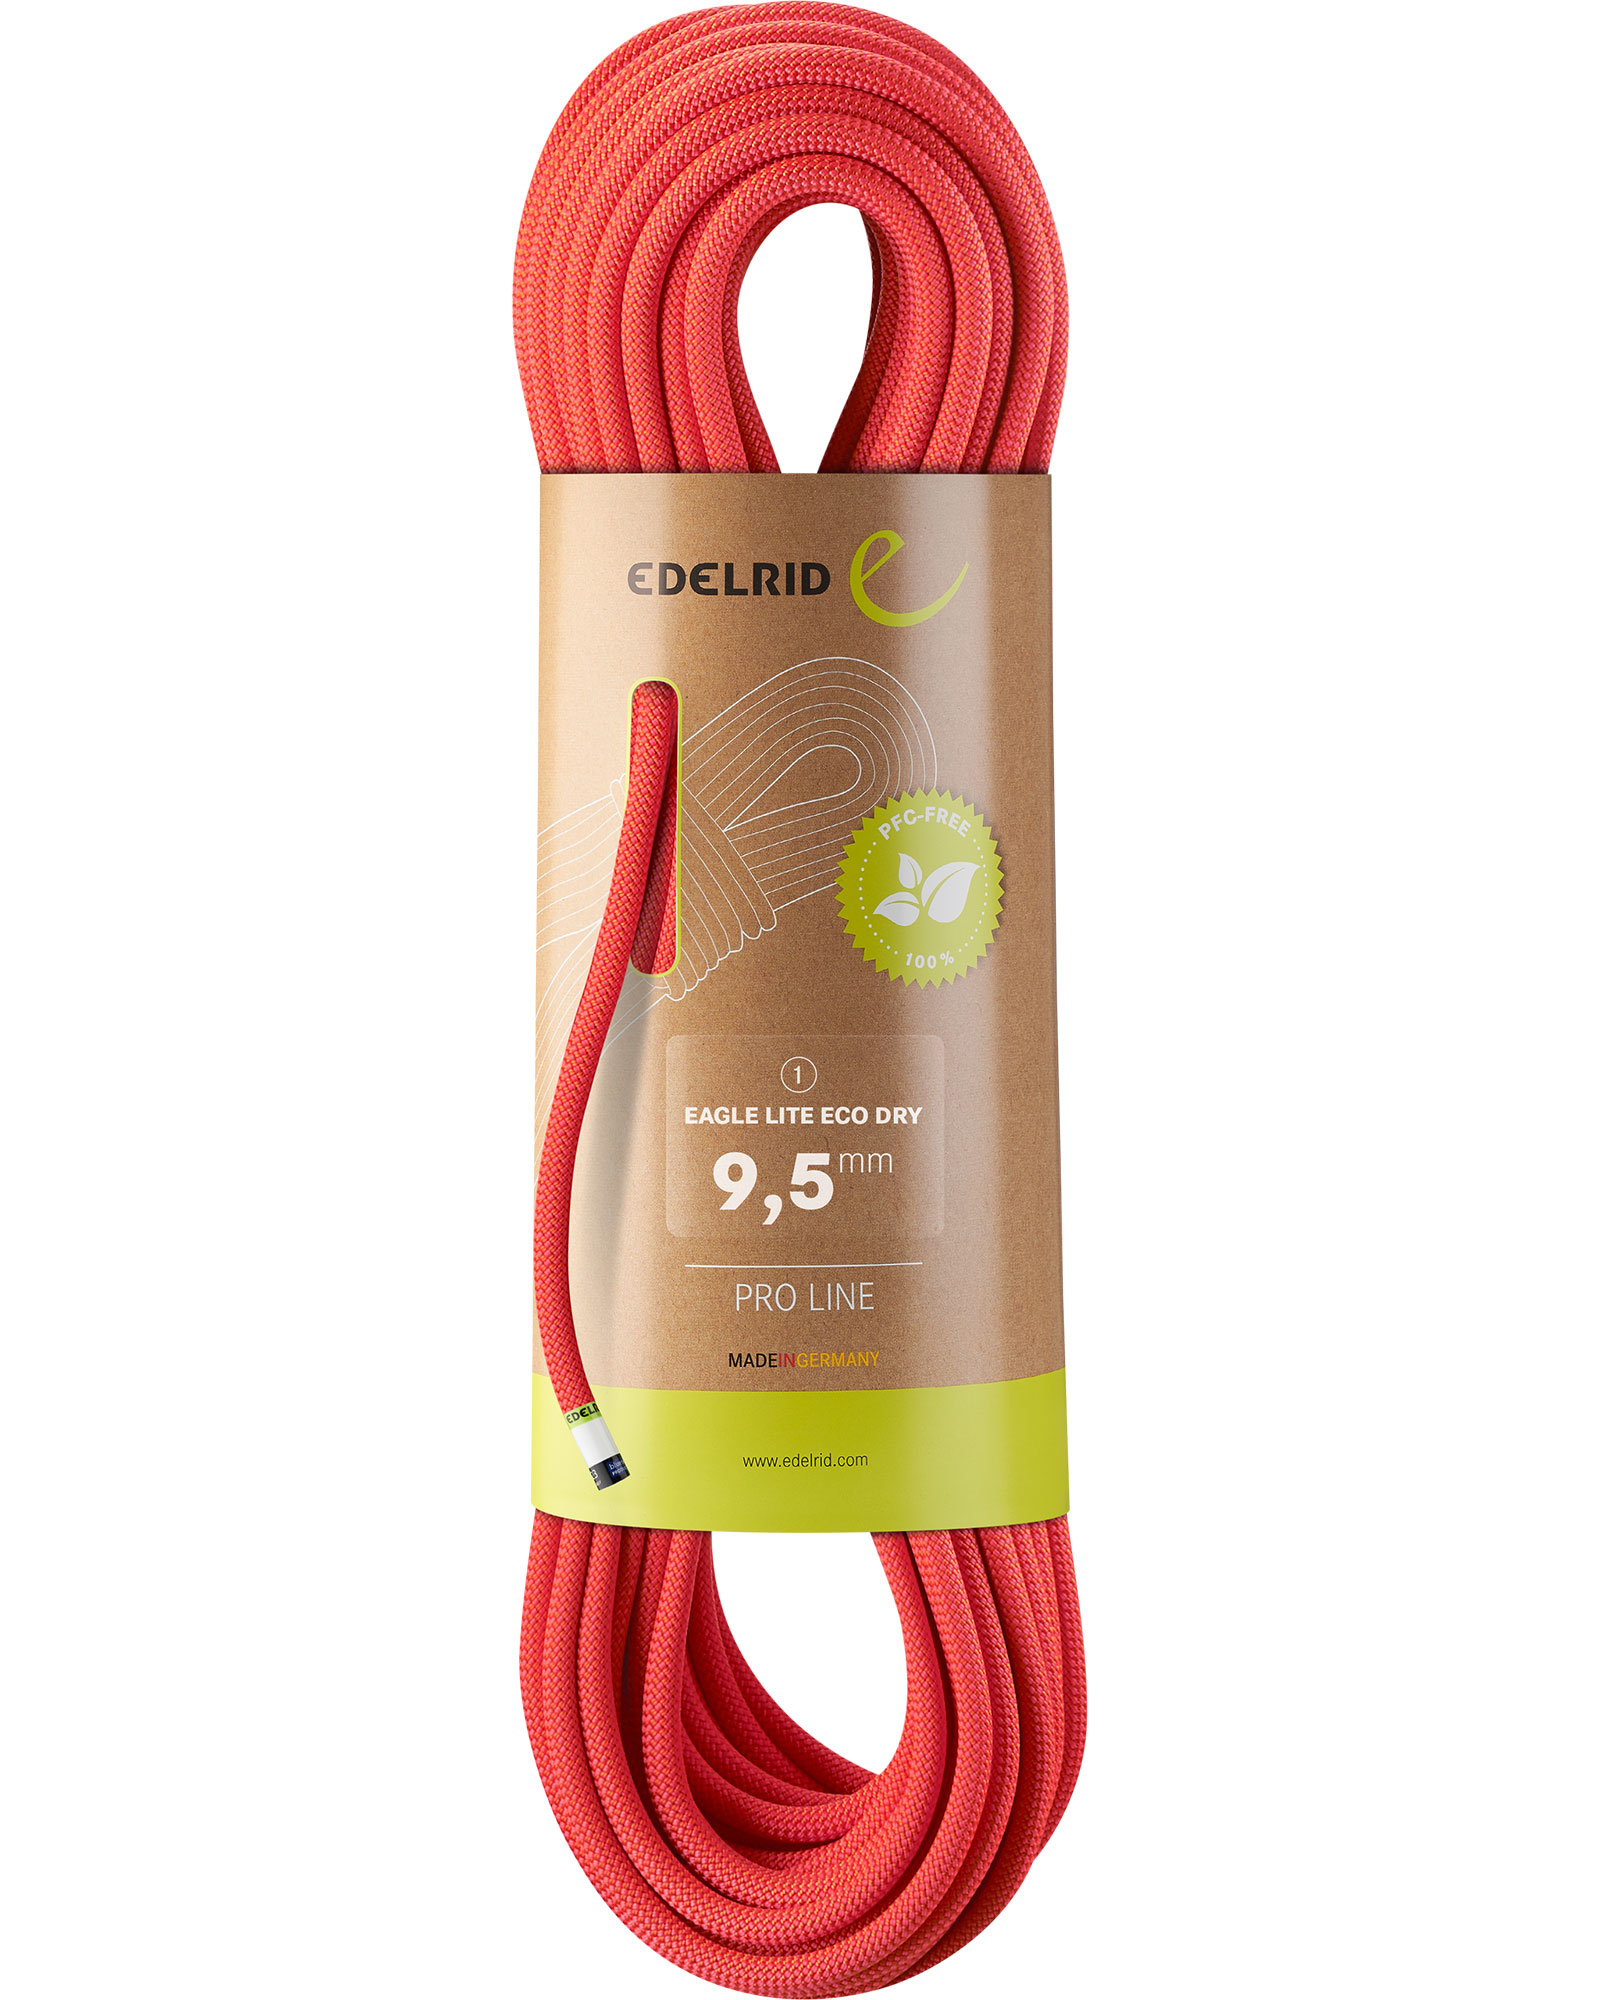 Edelrid Eagle Lite Eco Dry 9.5 x 70 Rope - Neon Coral 70m